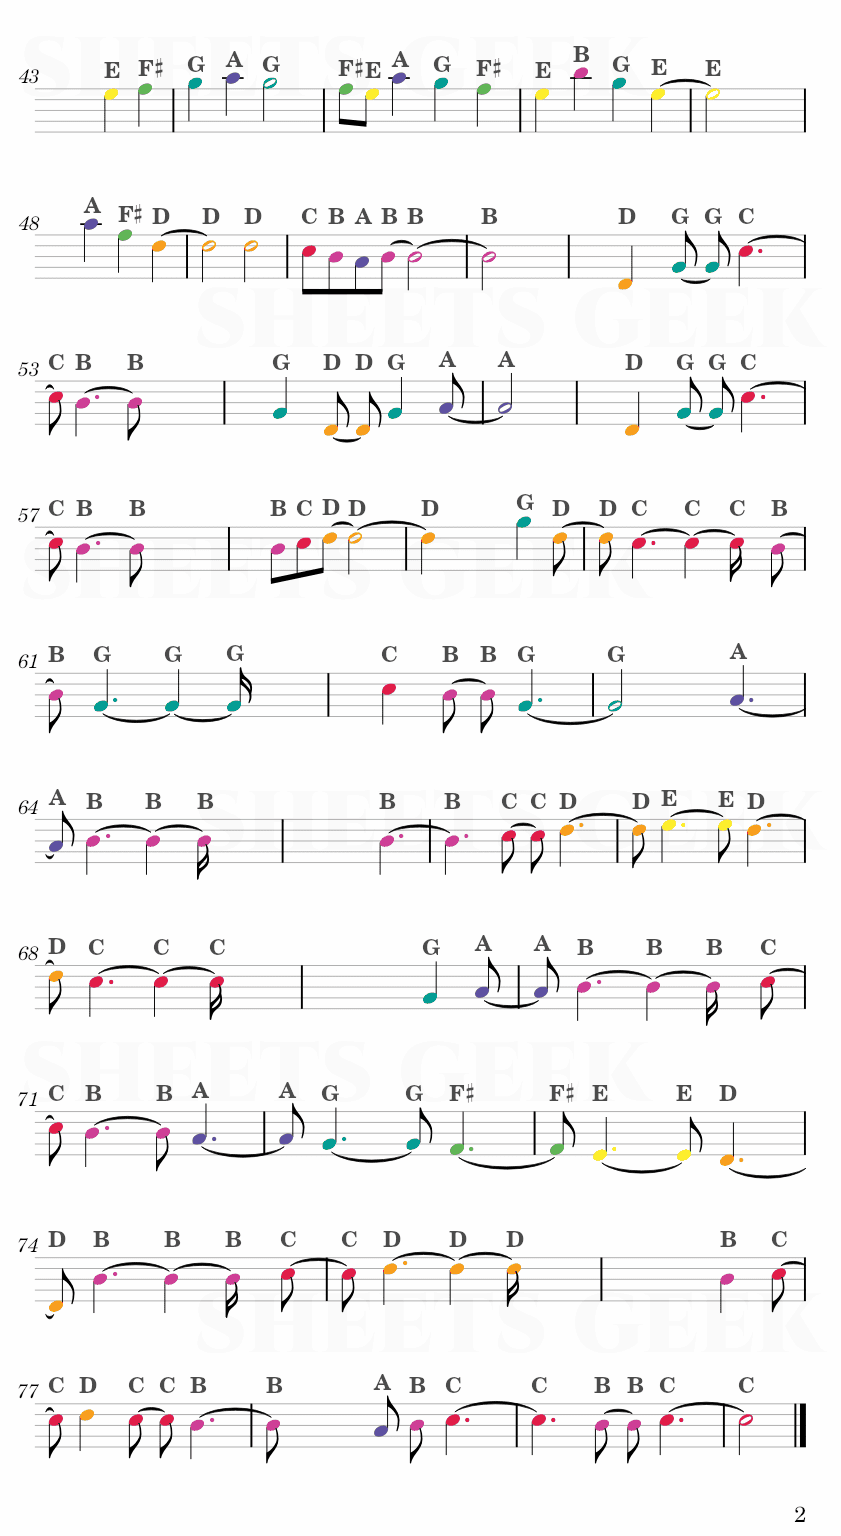 Lazy Afternoons - Kingdom Hearts 2 Easy Sheet Music Free for piano, keyboard, flute, violin, sax, cello page 2